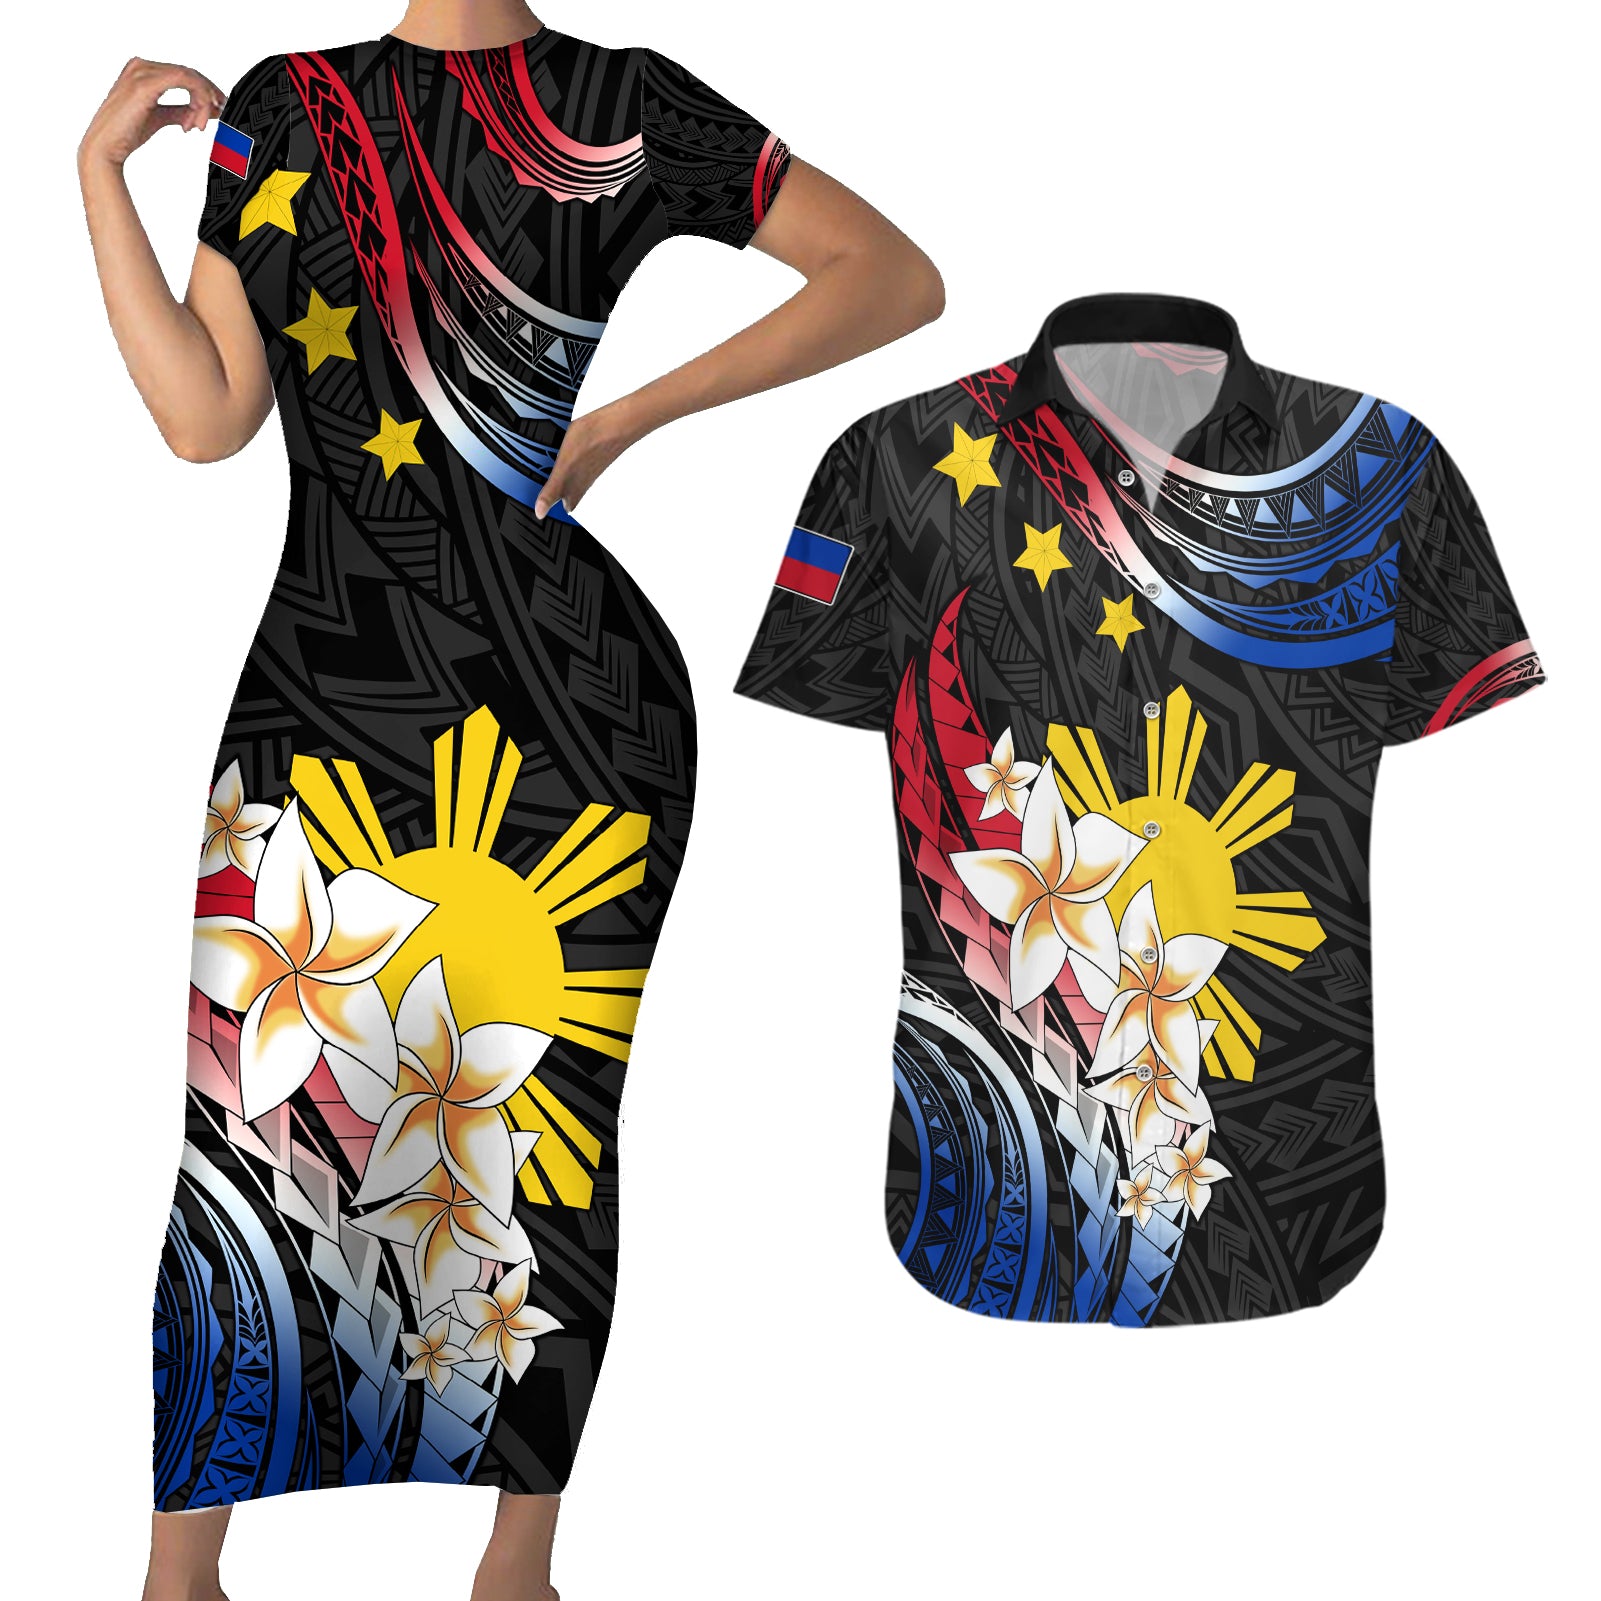 Personalised Philippines Tribal Couples Matching Short Sleeve Bodycon Dress and Hawaiian Shirt Mix Plumeria - Flag Colors LT7 Black - Polynesian Pride